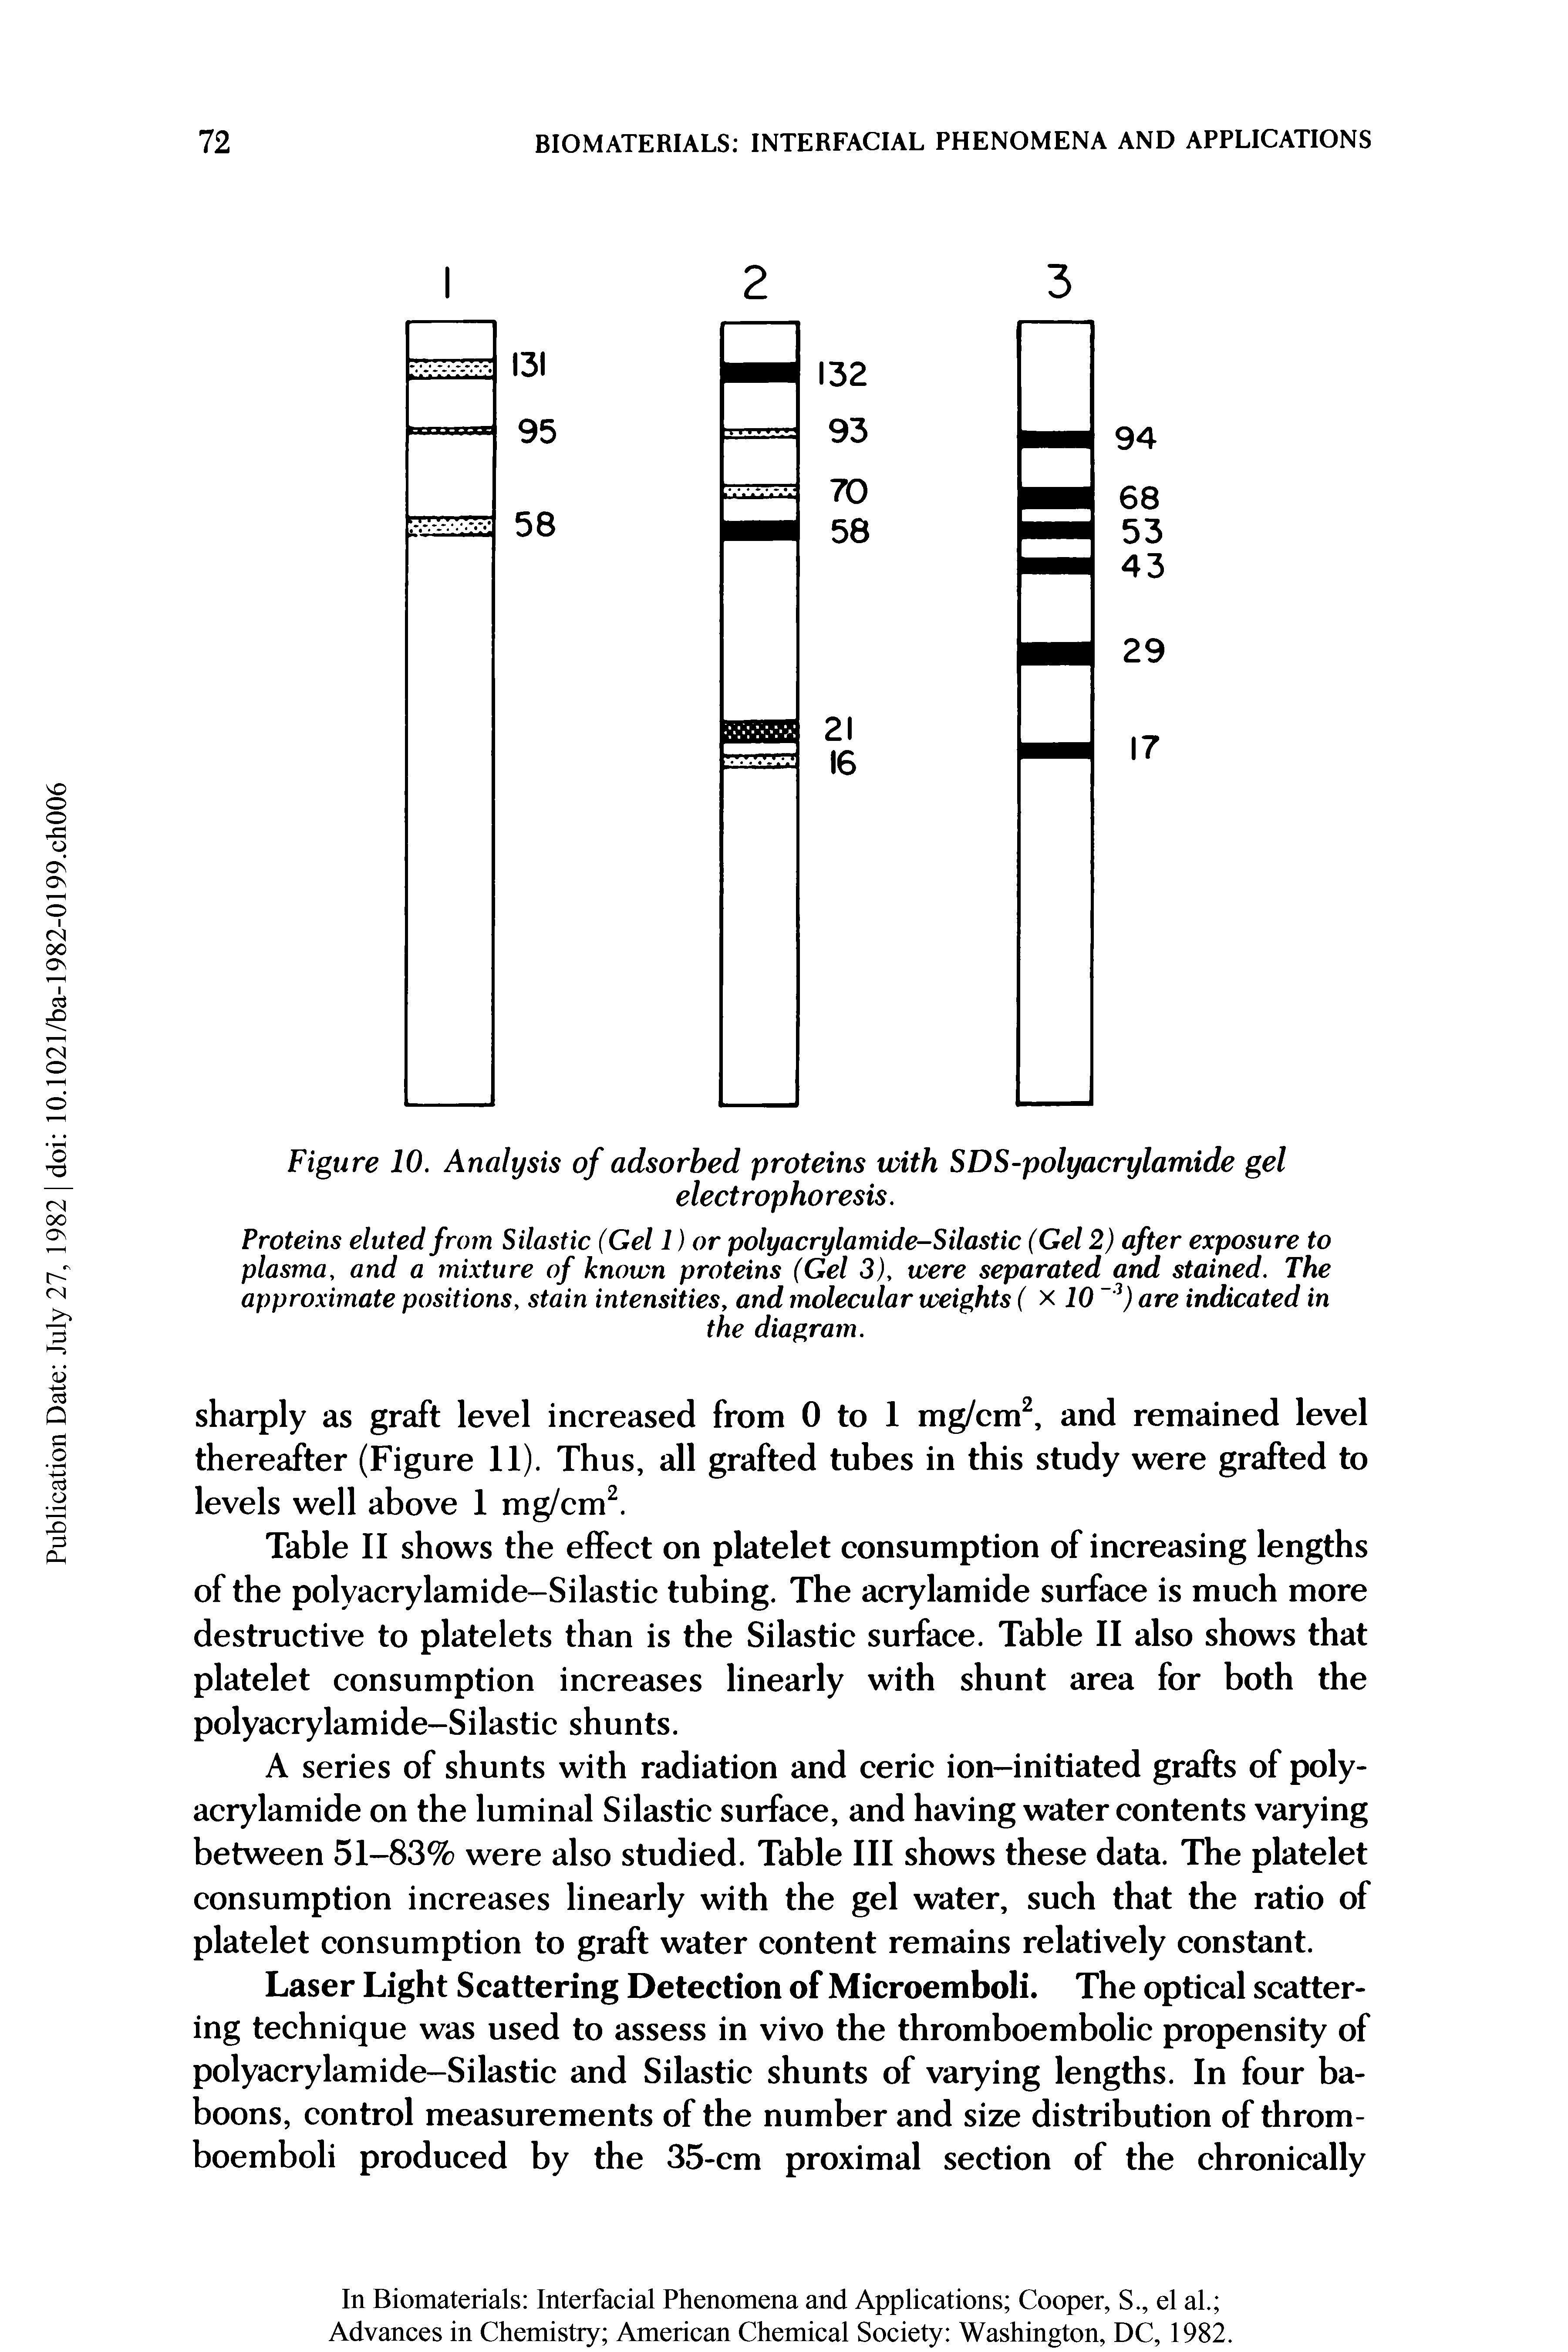 Table II shows the effect on platelet consumption of increasing lengths of the polyacrylamide-Silastic tubing. The acrylamide surface is much more destructive to platelets than is the Silastic surface. Table II also shows that platelet consumption increases linearly with shunt area for both the polyacrylamide-Silastic shunts.